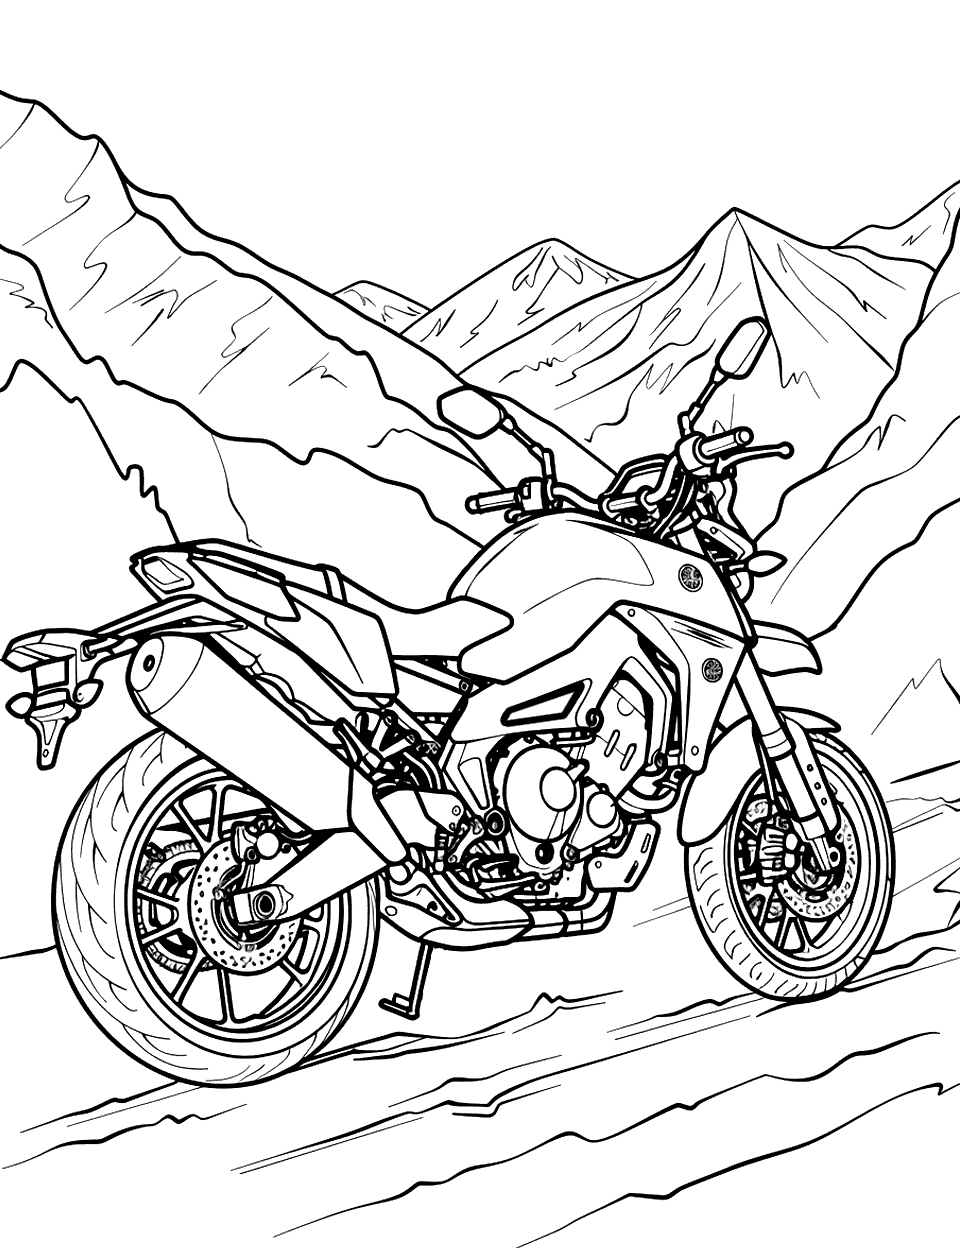 Yamaha Motorcycle Adventure Coloring Page - A Yamaha motorcycle on a dirt road, surrounded by mountains.